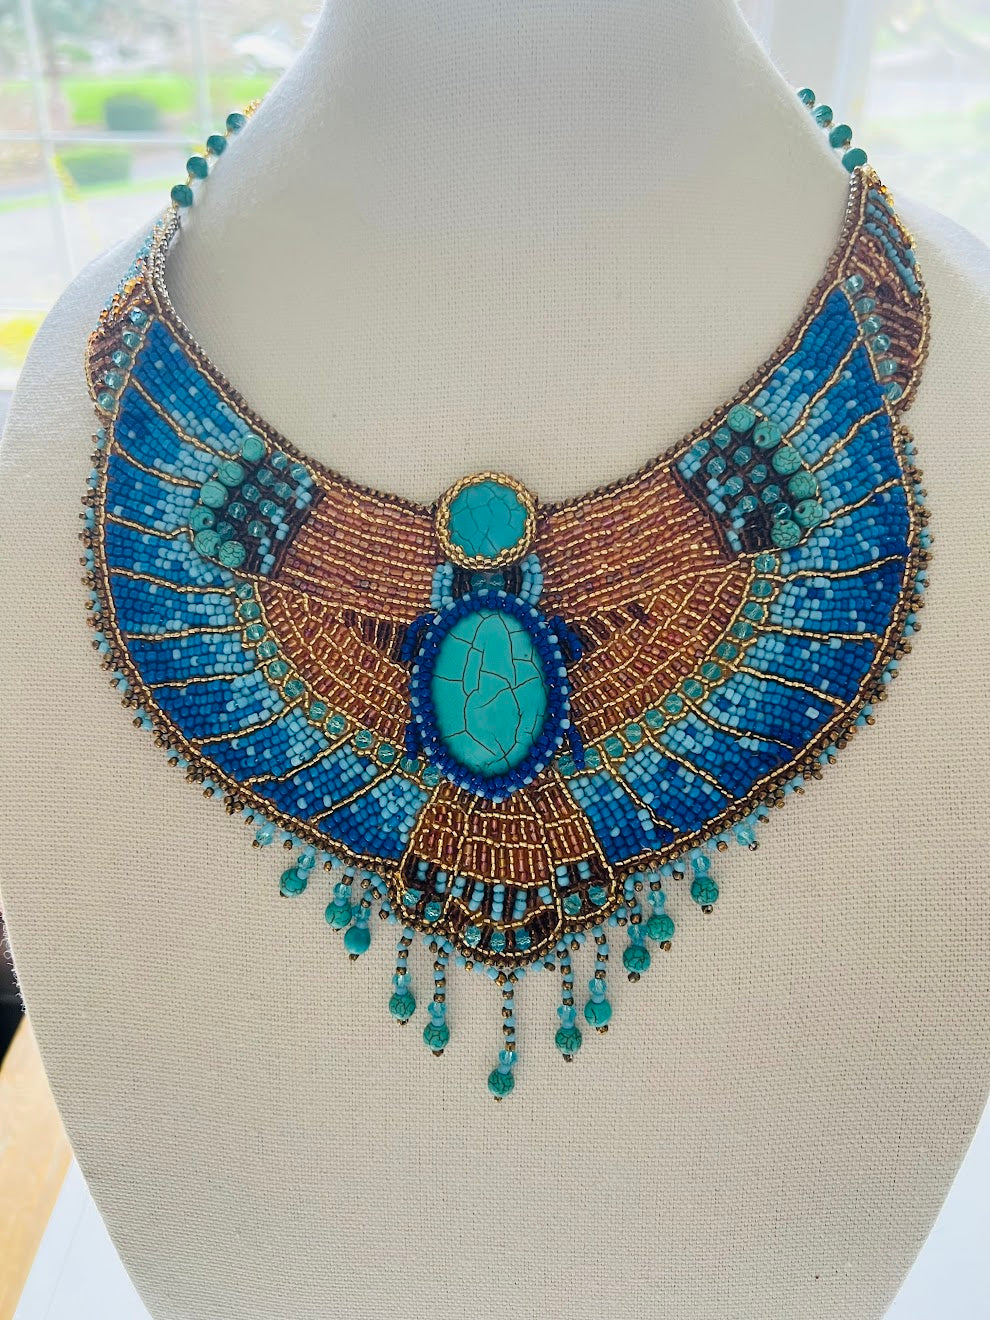 Cleopatra Necklace - Egyptian beaded embroidered collar necklace